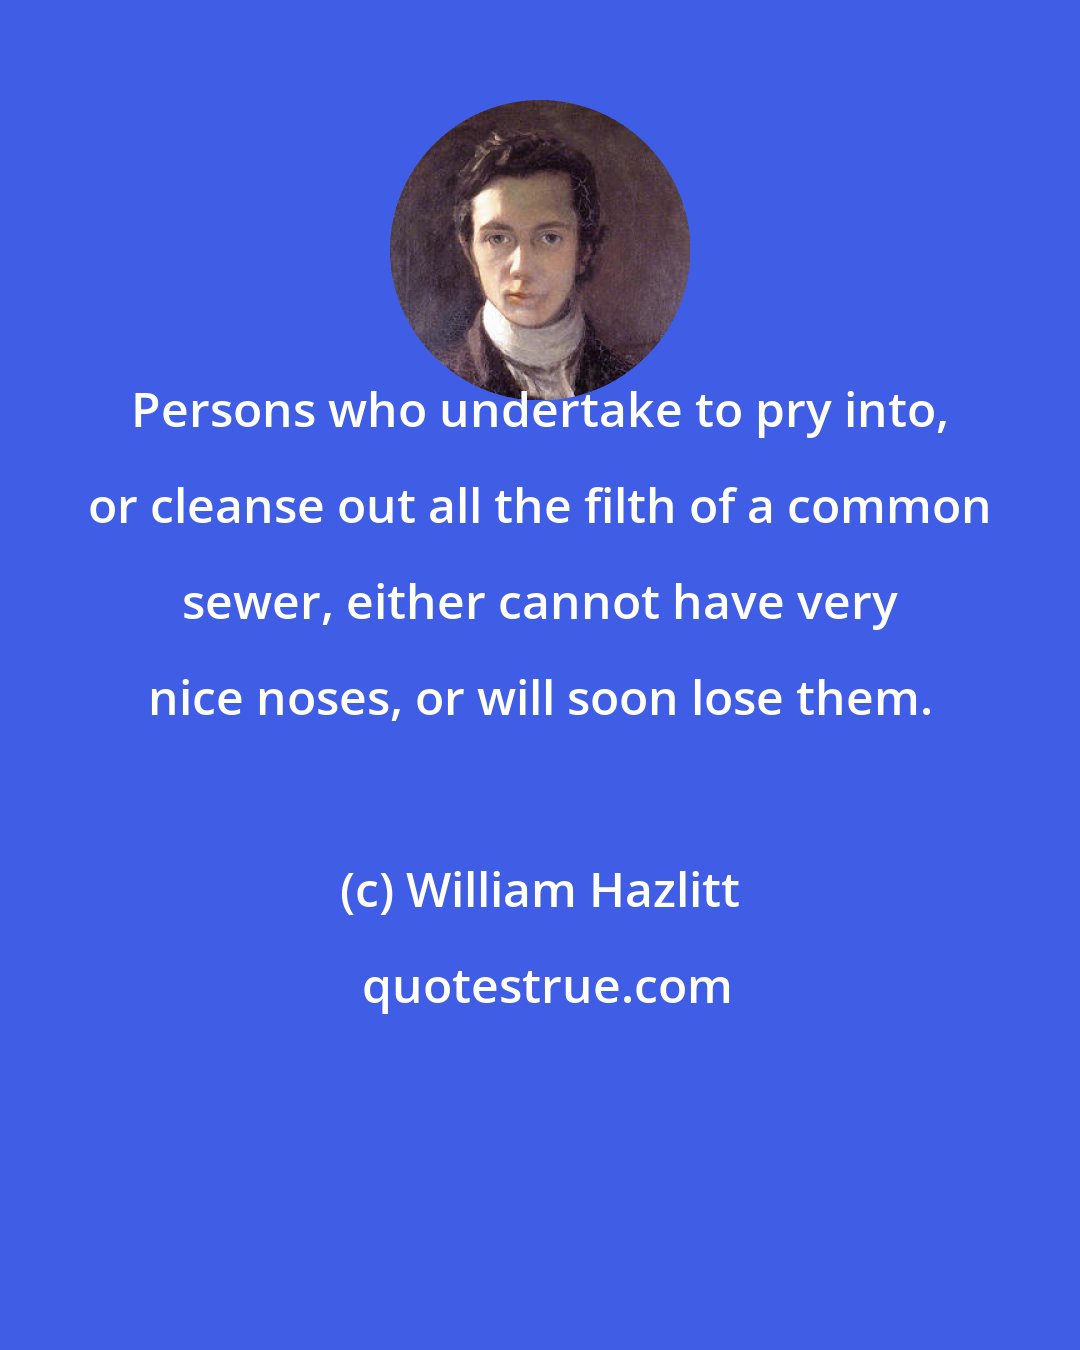 William Hazlitt: Persons who undertake to pry into, or cleanse out all the filth of a common sewer, either cannot have very nice noses, or will soon lose them.